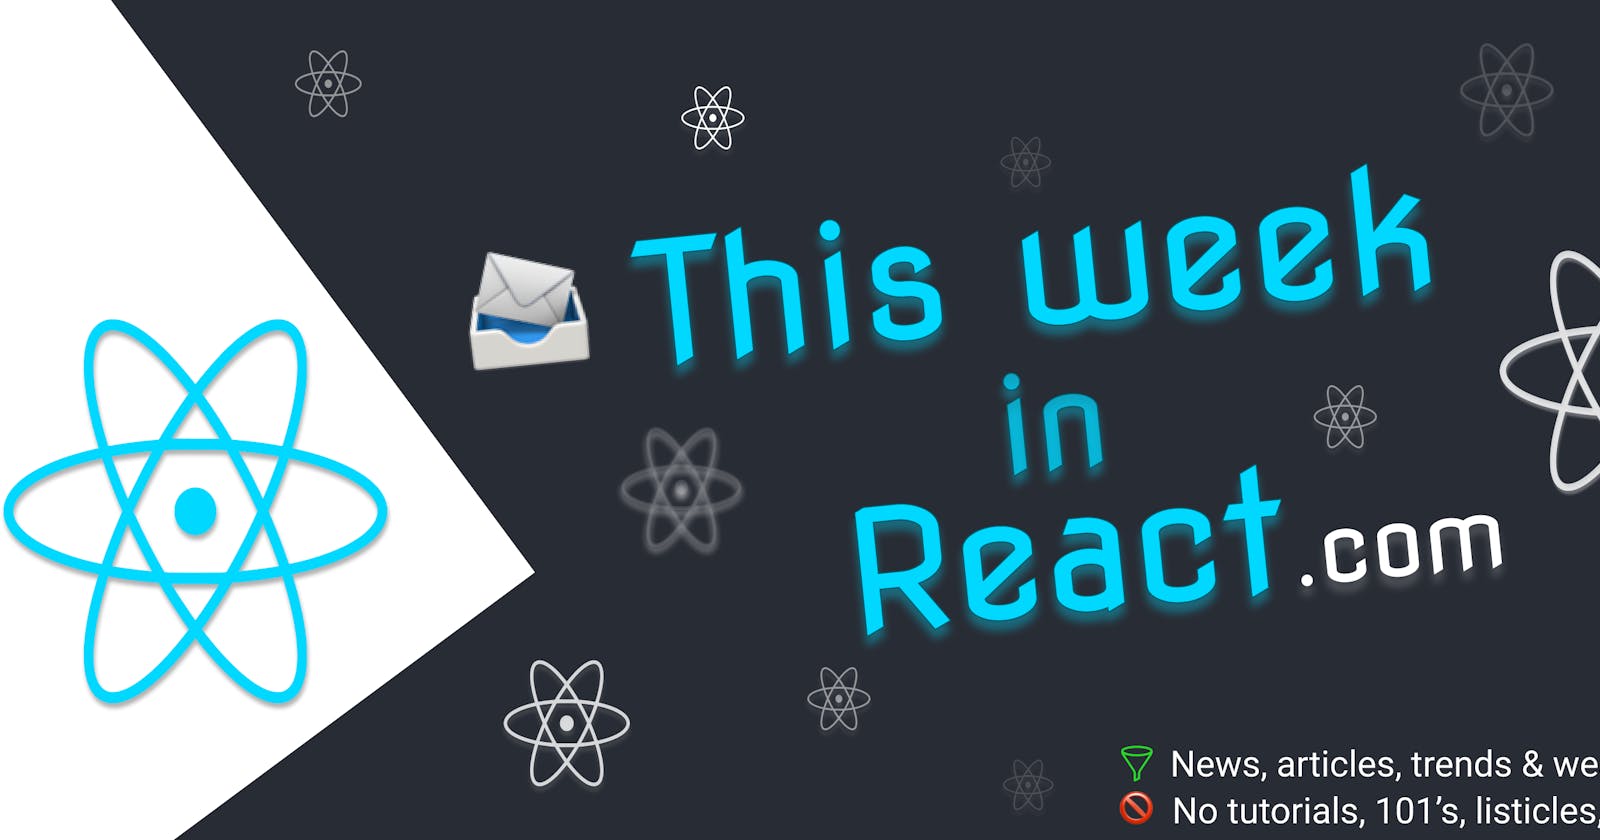 This Week In React#149: Panda CSS, React-Native 0.72, Server Actions, Isograph, Remix, Gatsby, Storybook, OpenNext, Wrap-Balancer, Docusaurus...